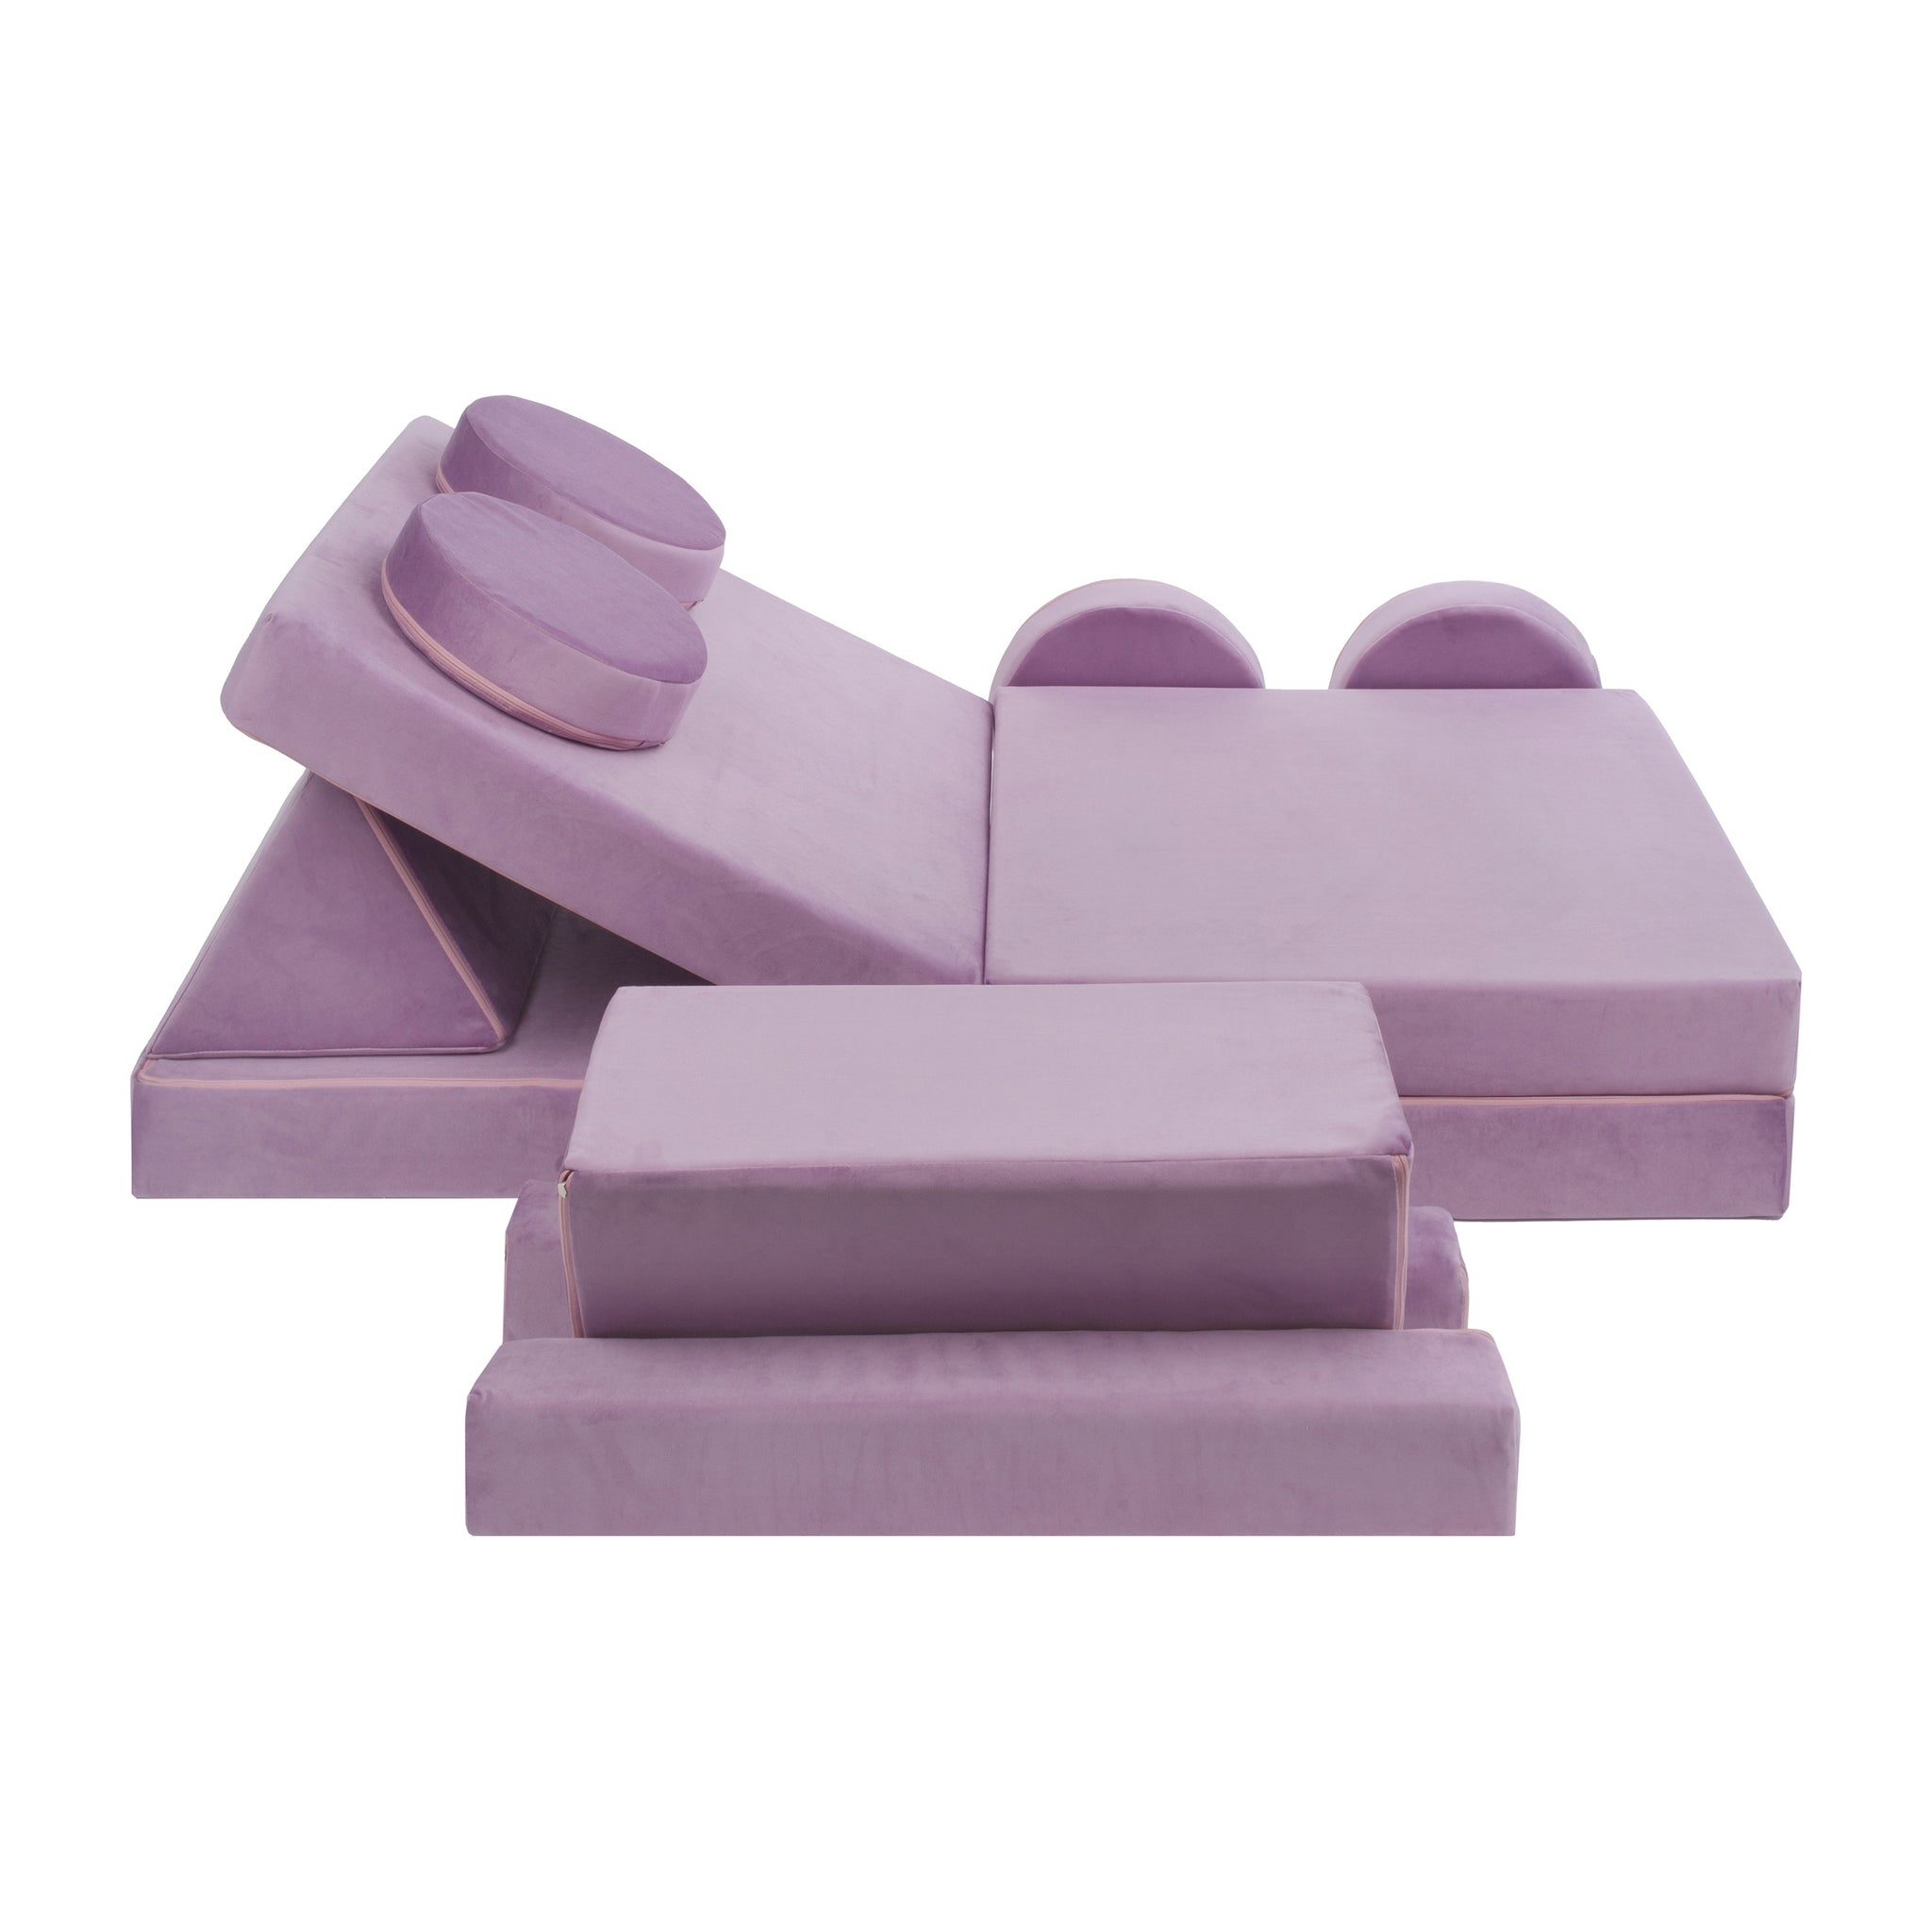 Soft Play Modular Couch, Purple